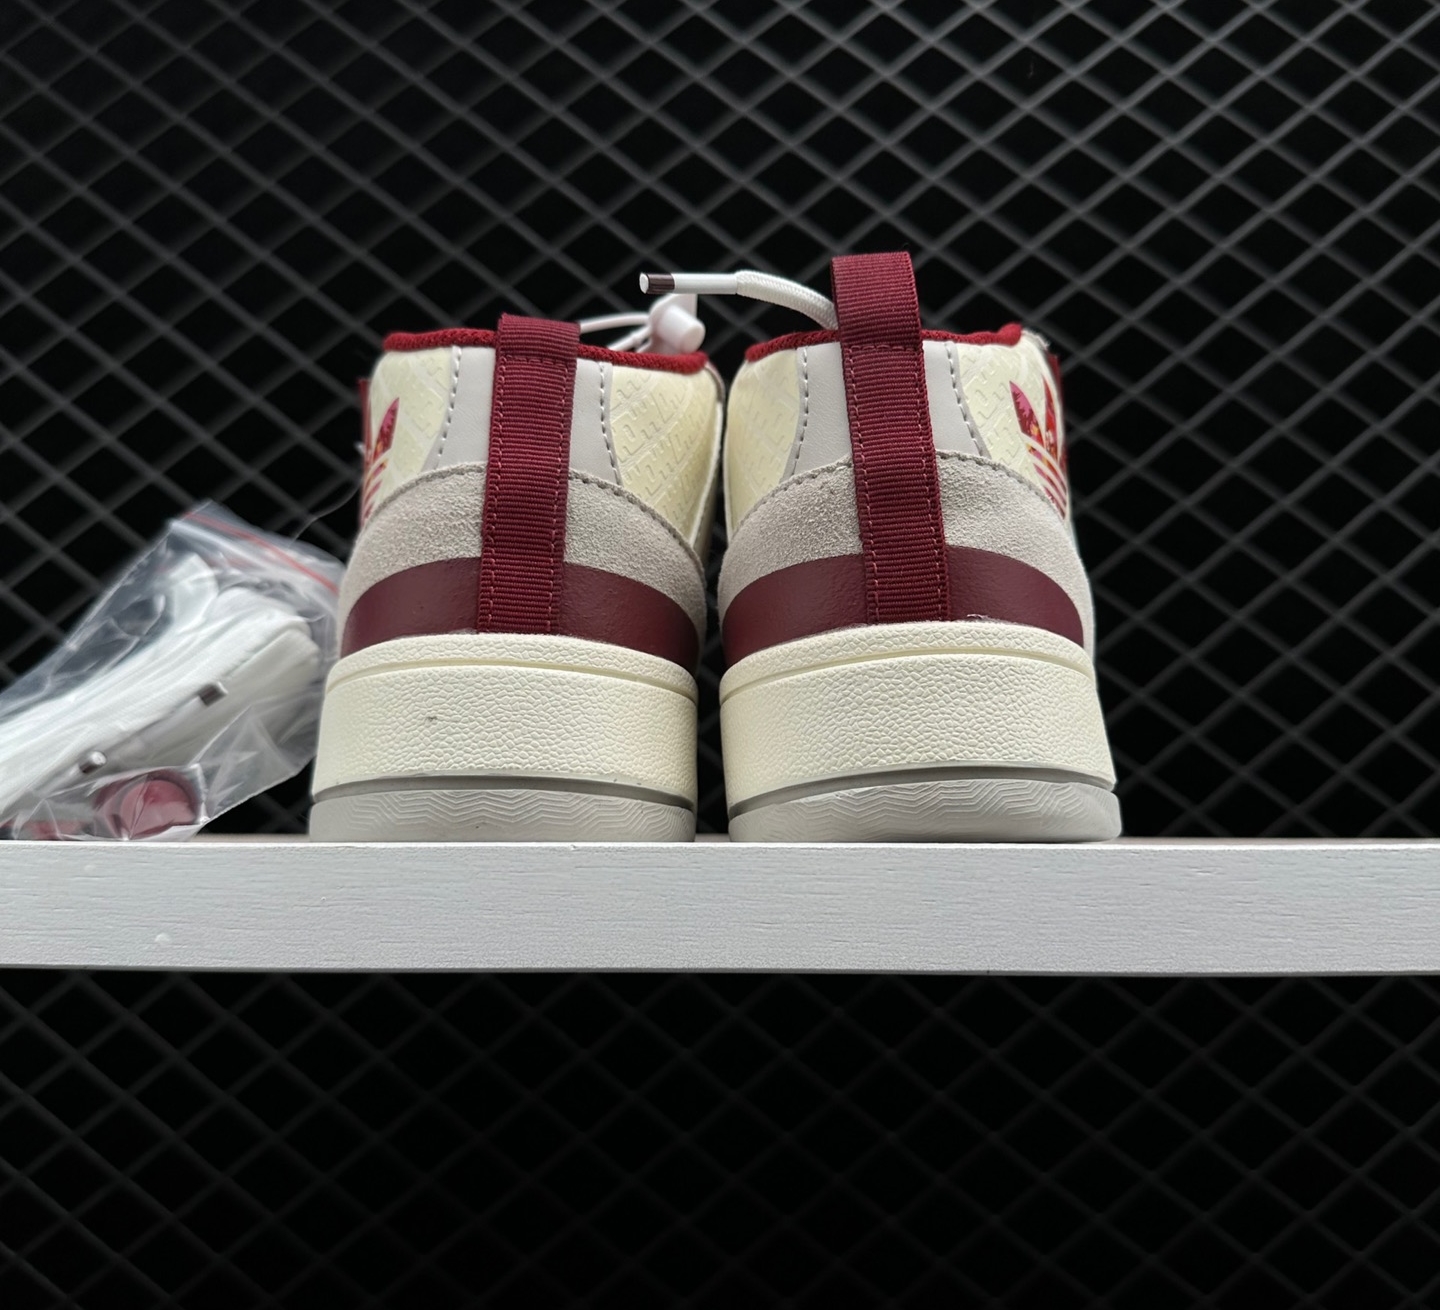 Adidas Originals Post Up 'Red White' IF2564 - Classic Style with a Modern Twist